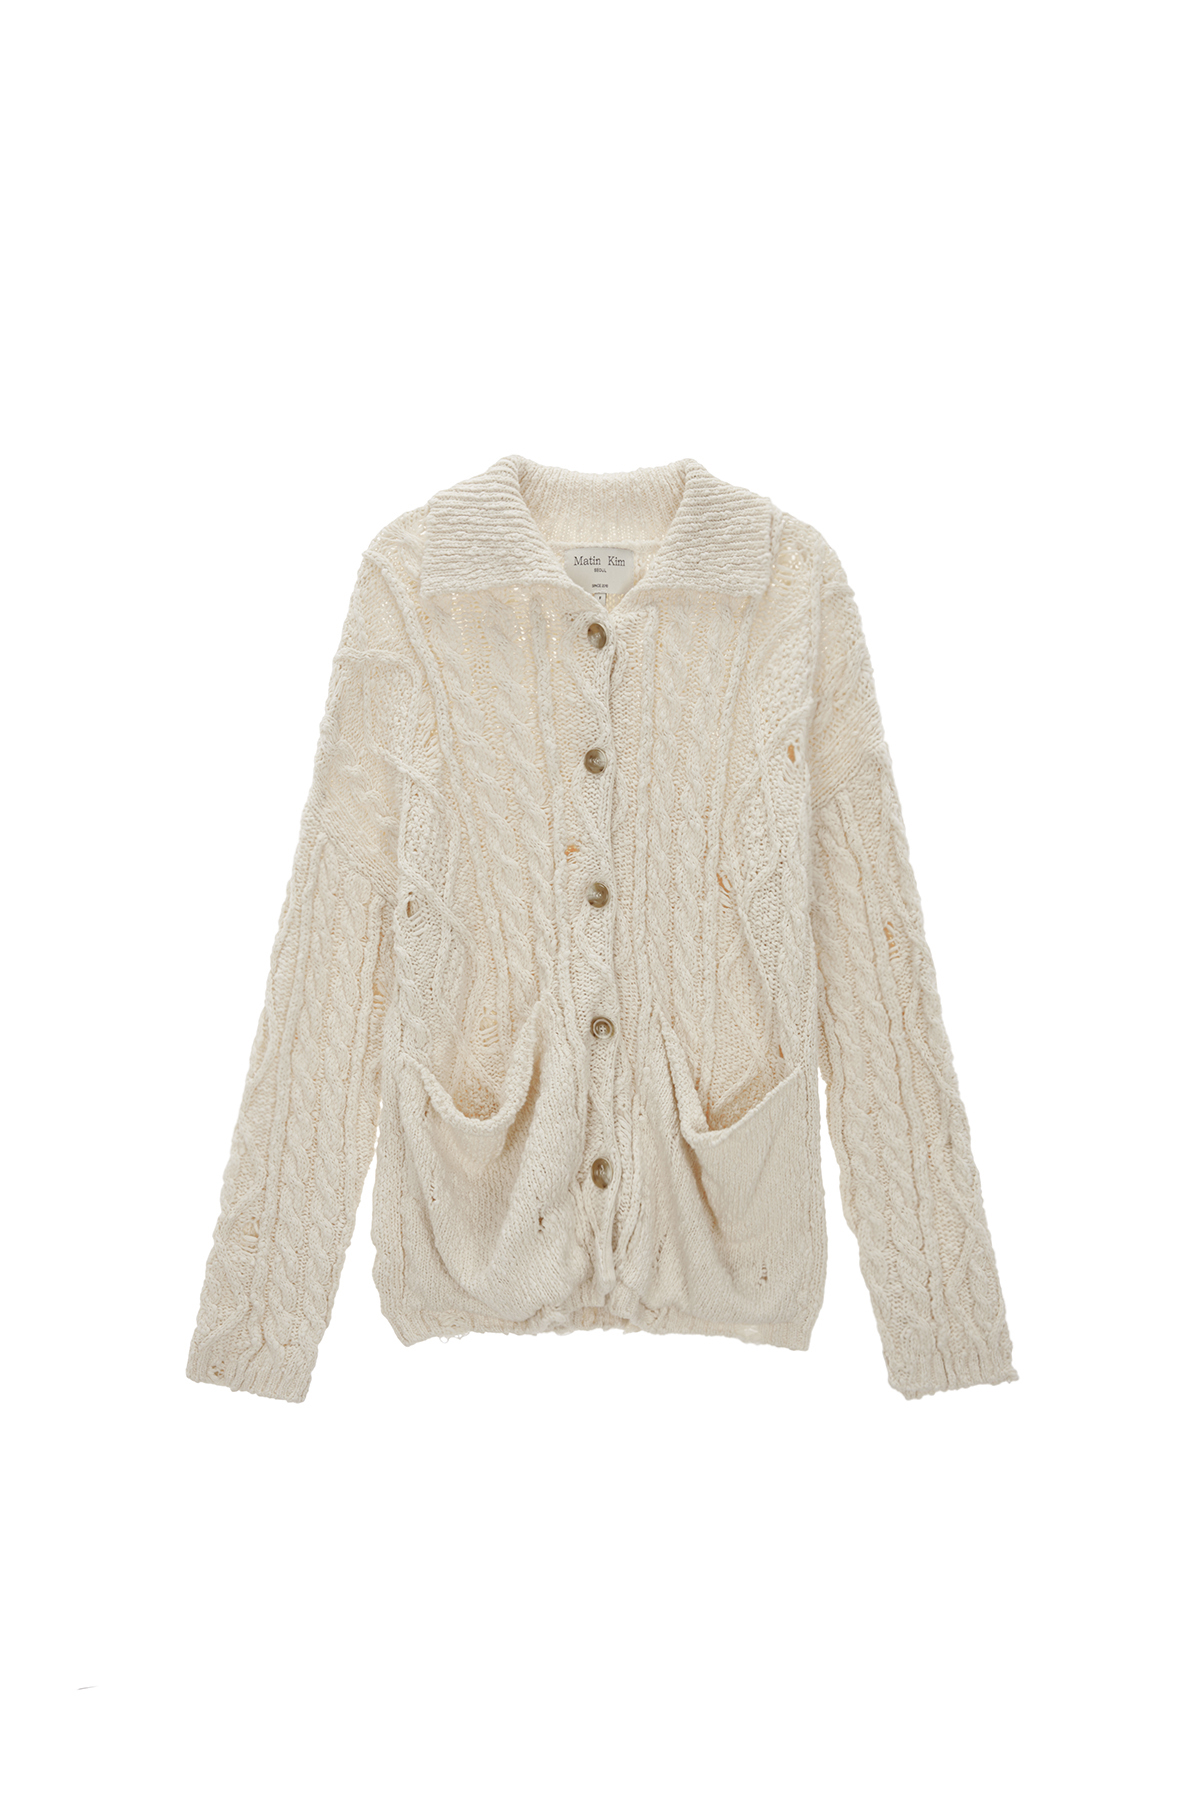 DAMAGE CABLE CARDIGAN IN IVORY